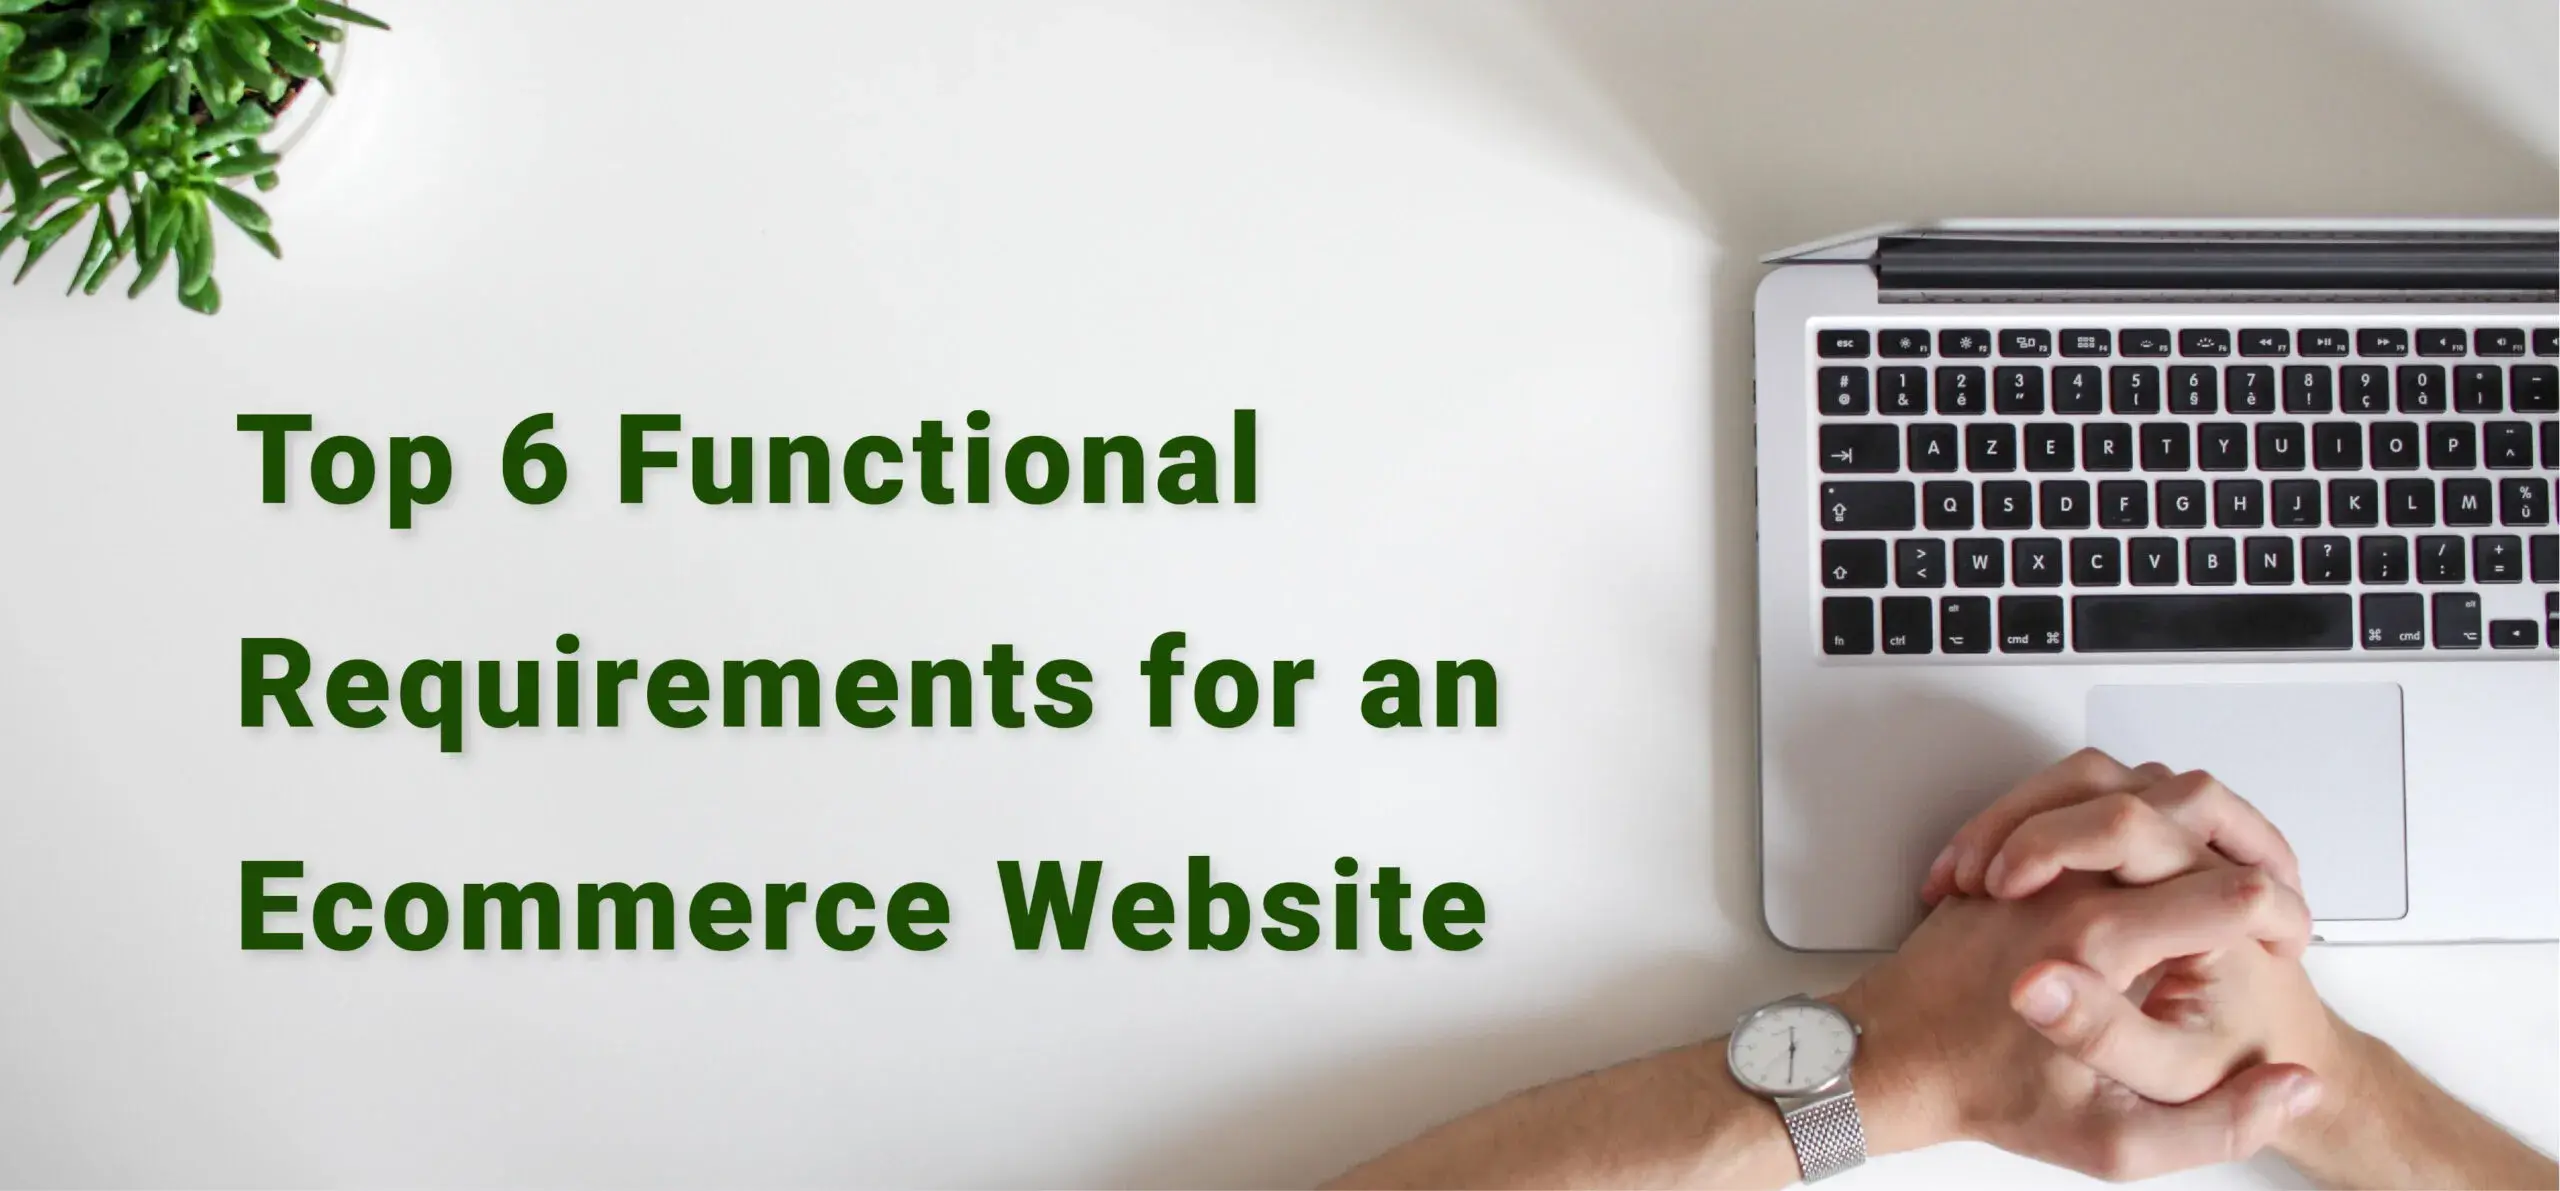 Top 6 Functional Requirements for an Ecommerce Website.